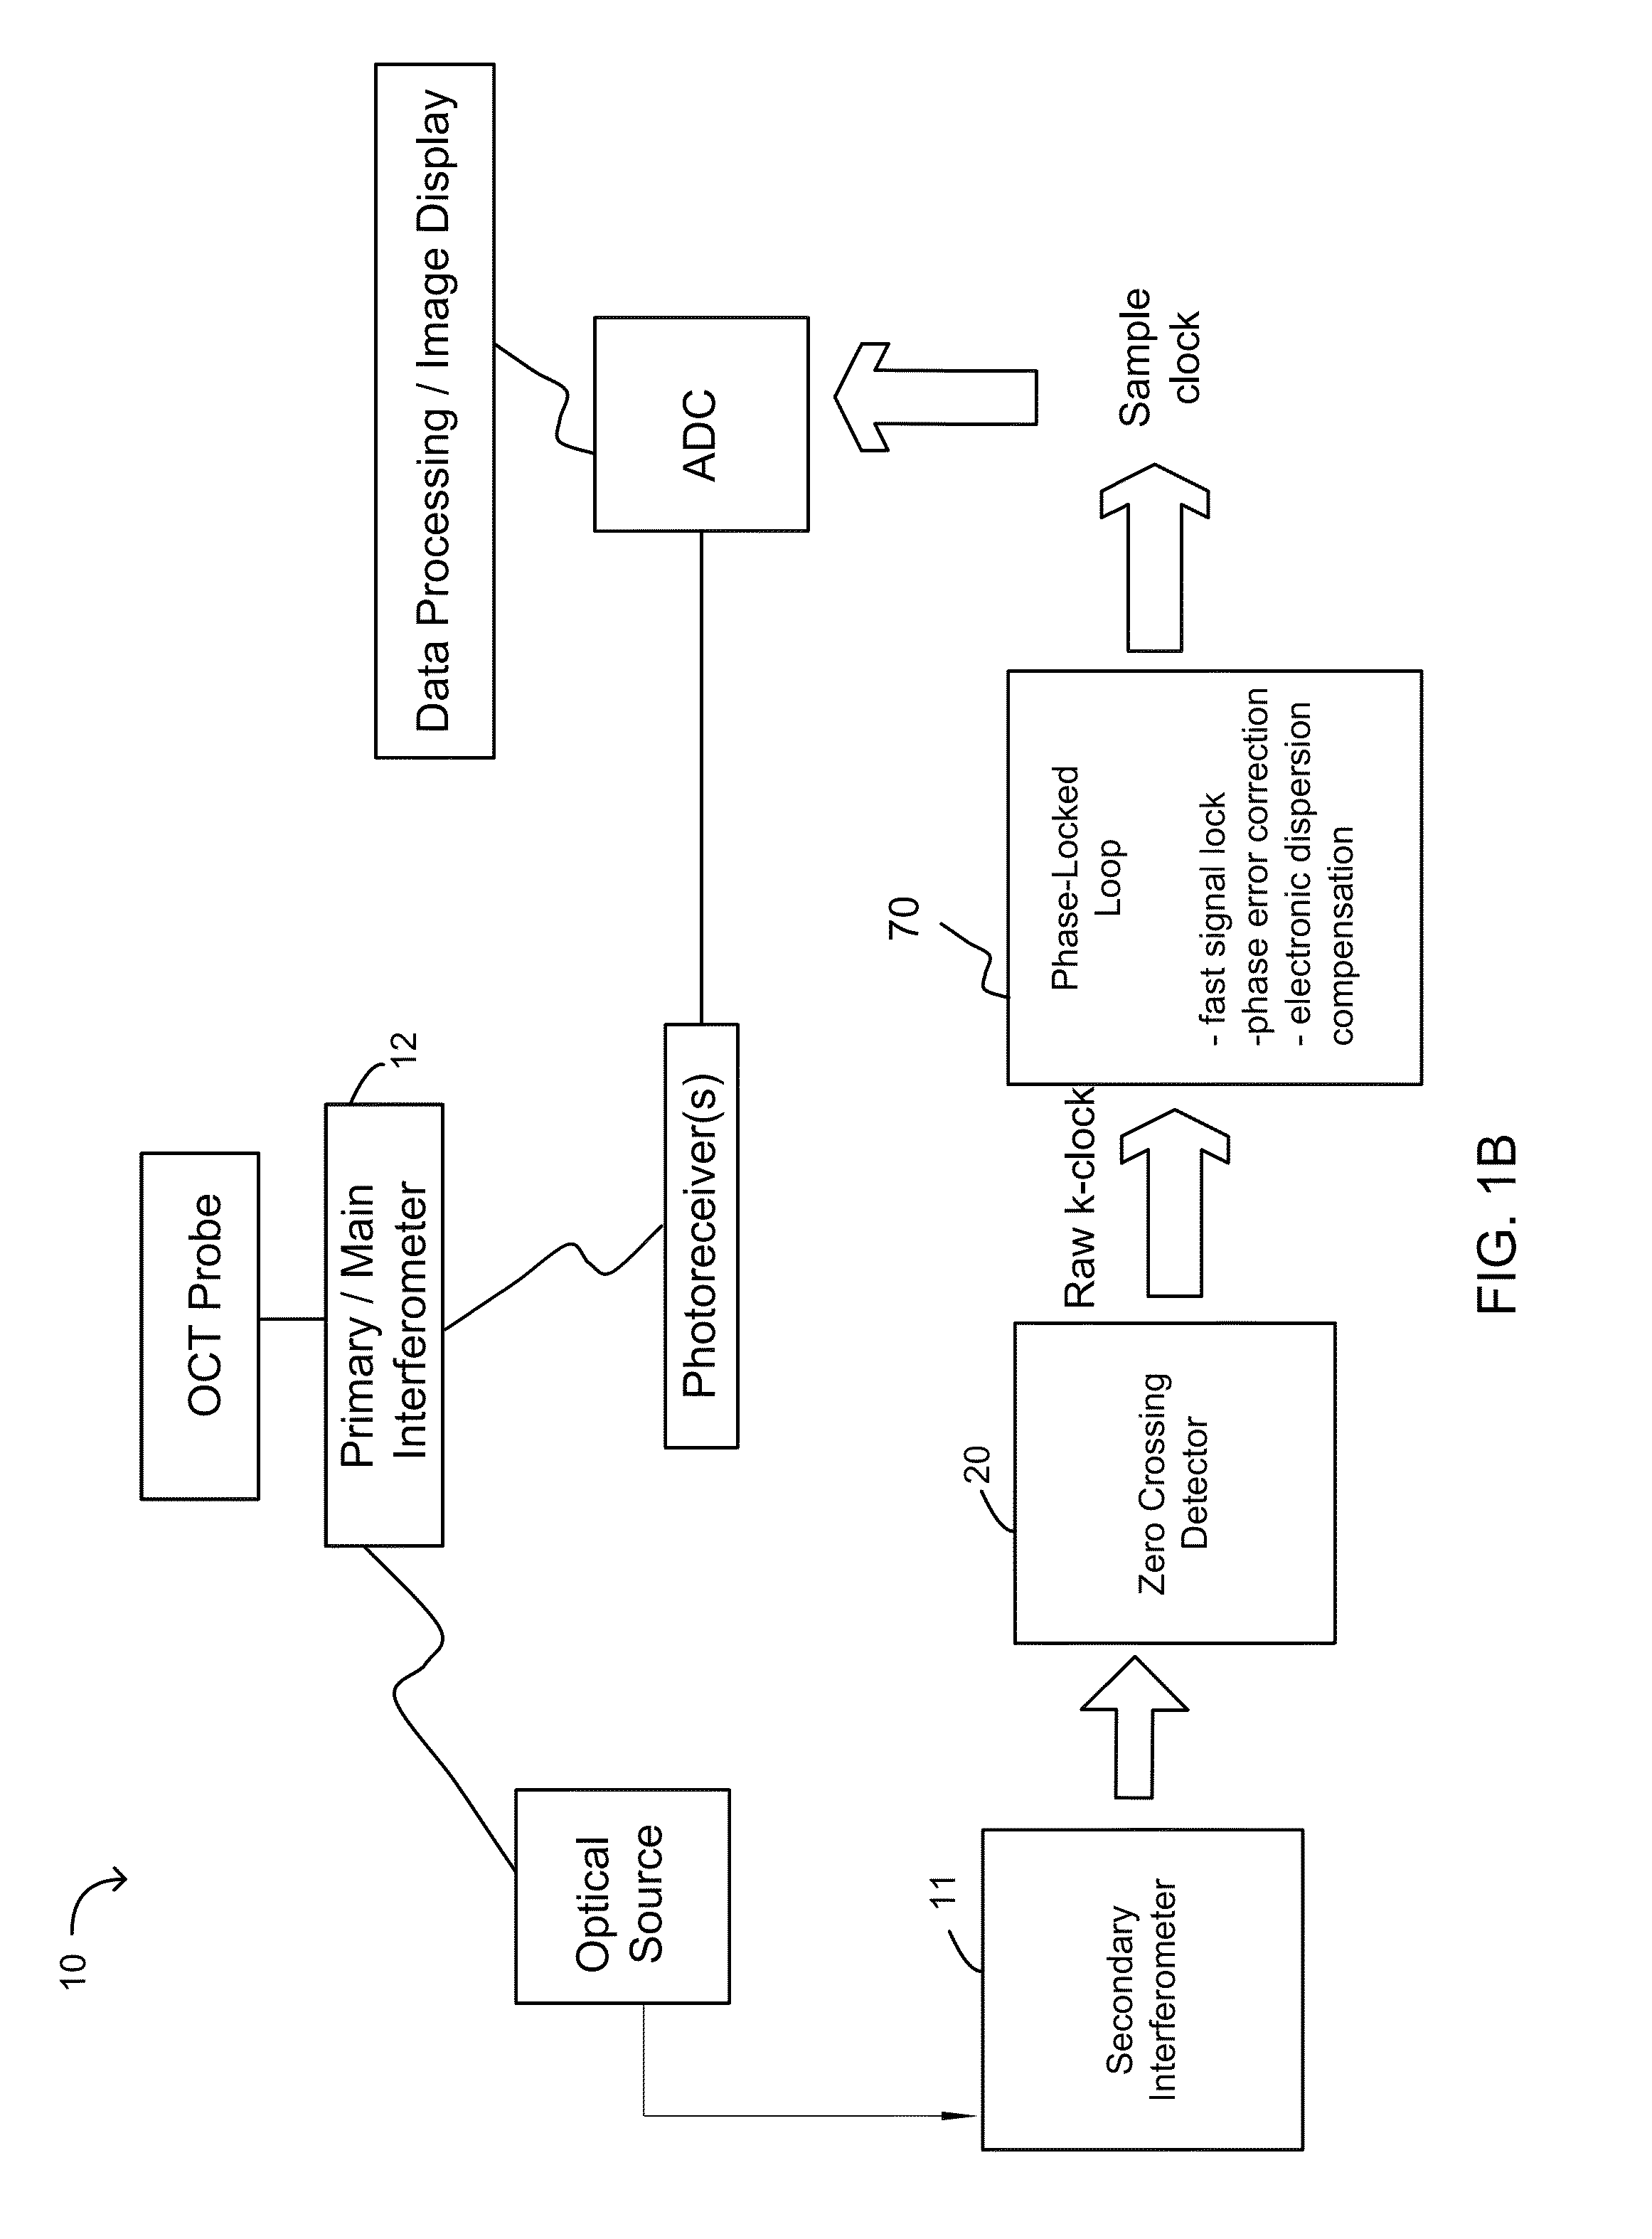 Phase-lock loop-based clocking system, methods and apparatus